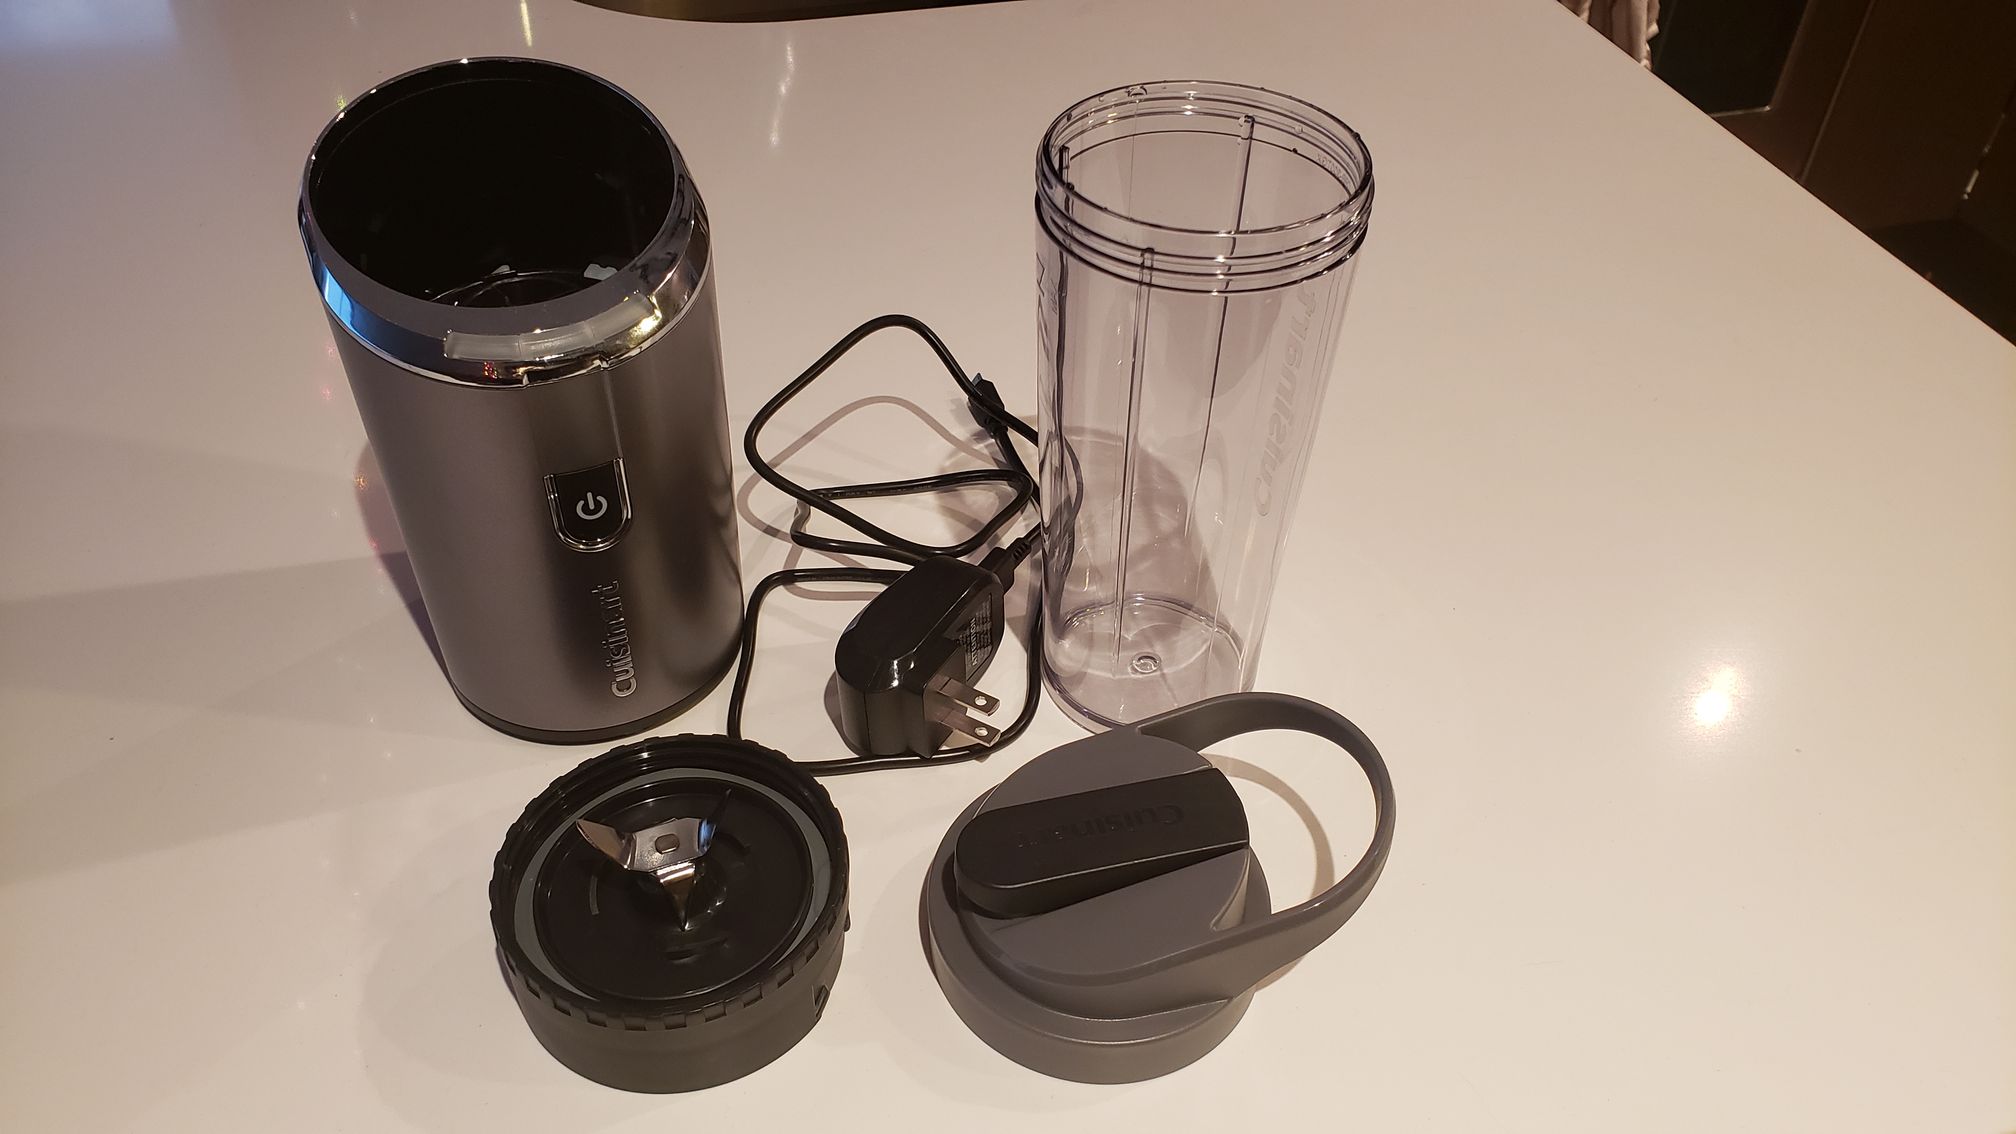 image of all the blender components: base, blades, tumbler, travel lid, and cord